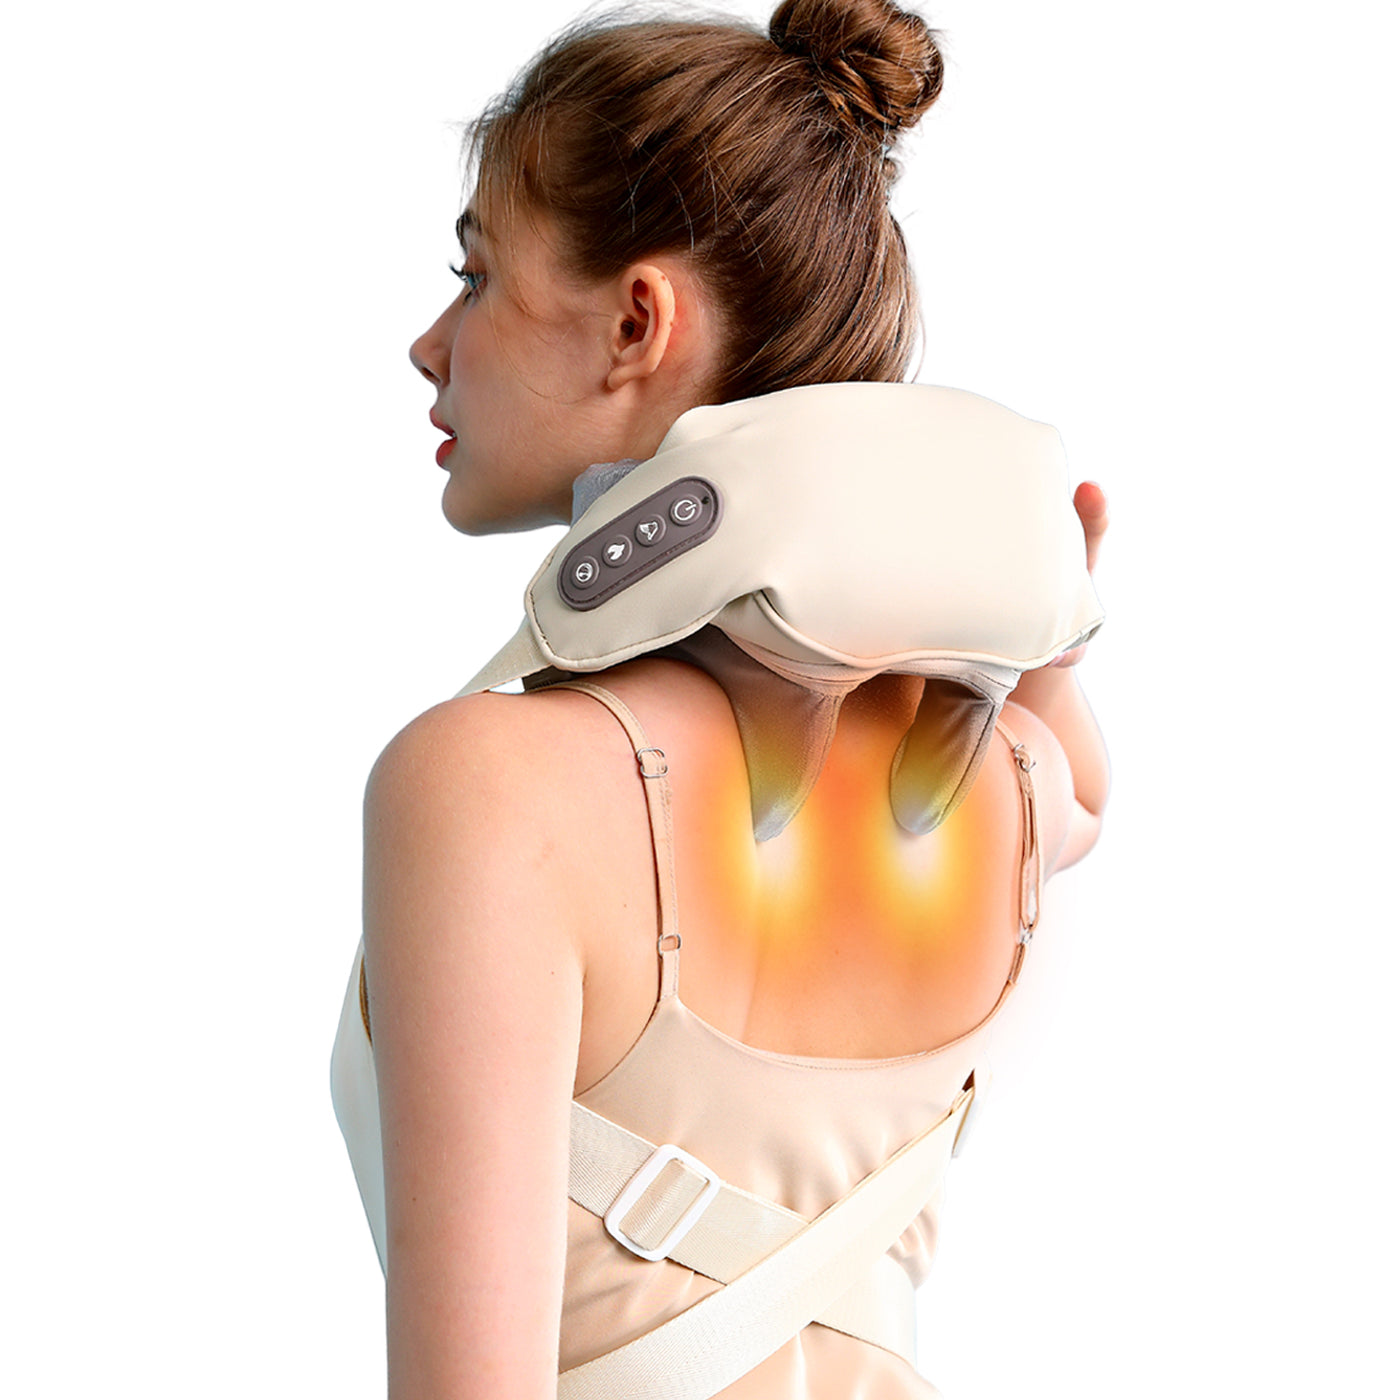 Neck Relax Neck Massager with Heat Neck Pain Relief Deep Tissue Device Neck  Massager Muscle Relaxati…See more Neck Relax Neck Massager with Heat Neck